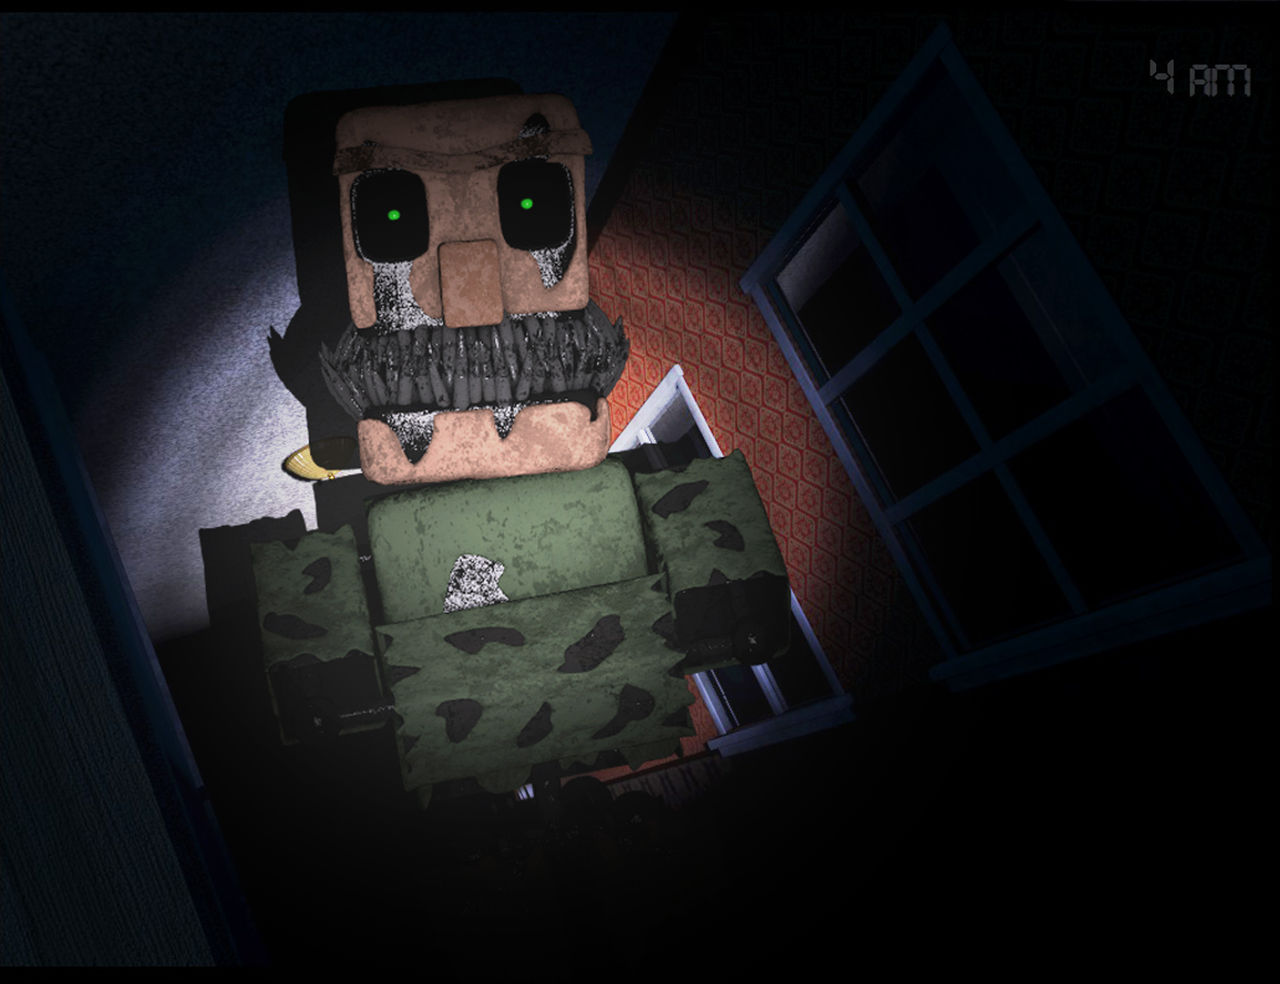 Watch Your Nightmare - FNAF 4 Remake with Cam 